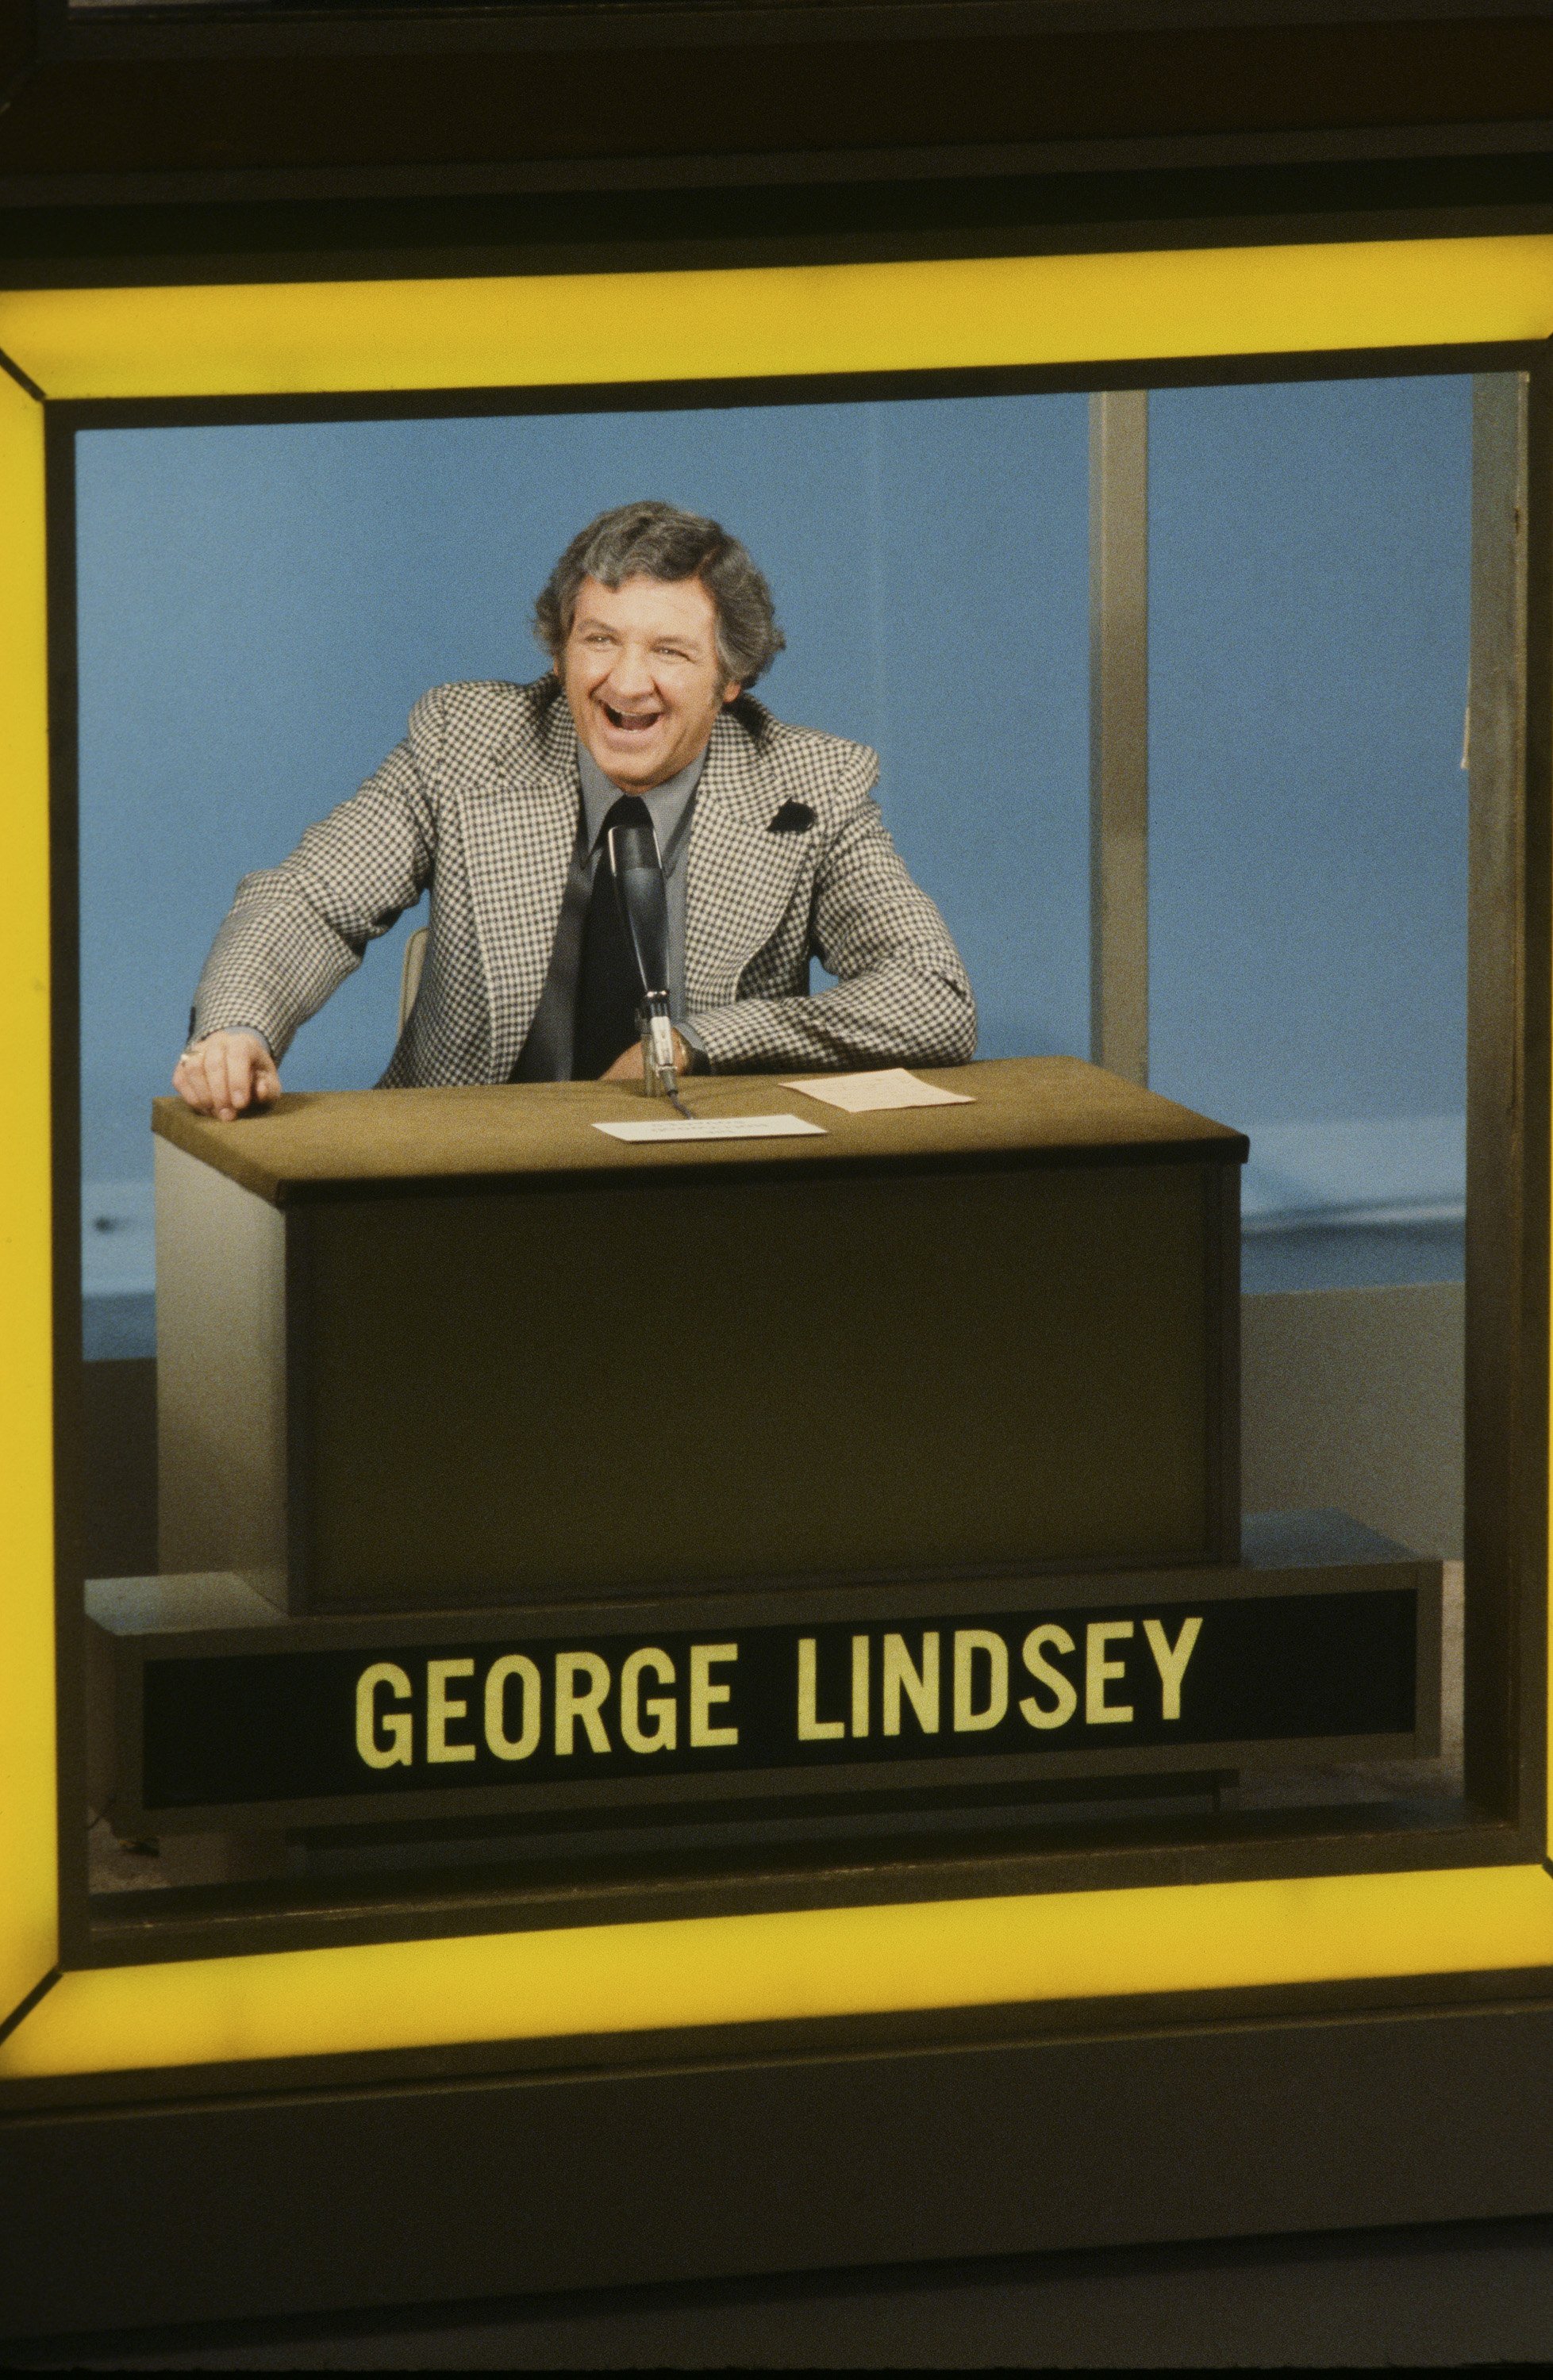 George Lindsey appears on 'Hollywood Squares' in 1980